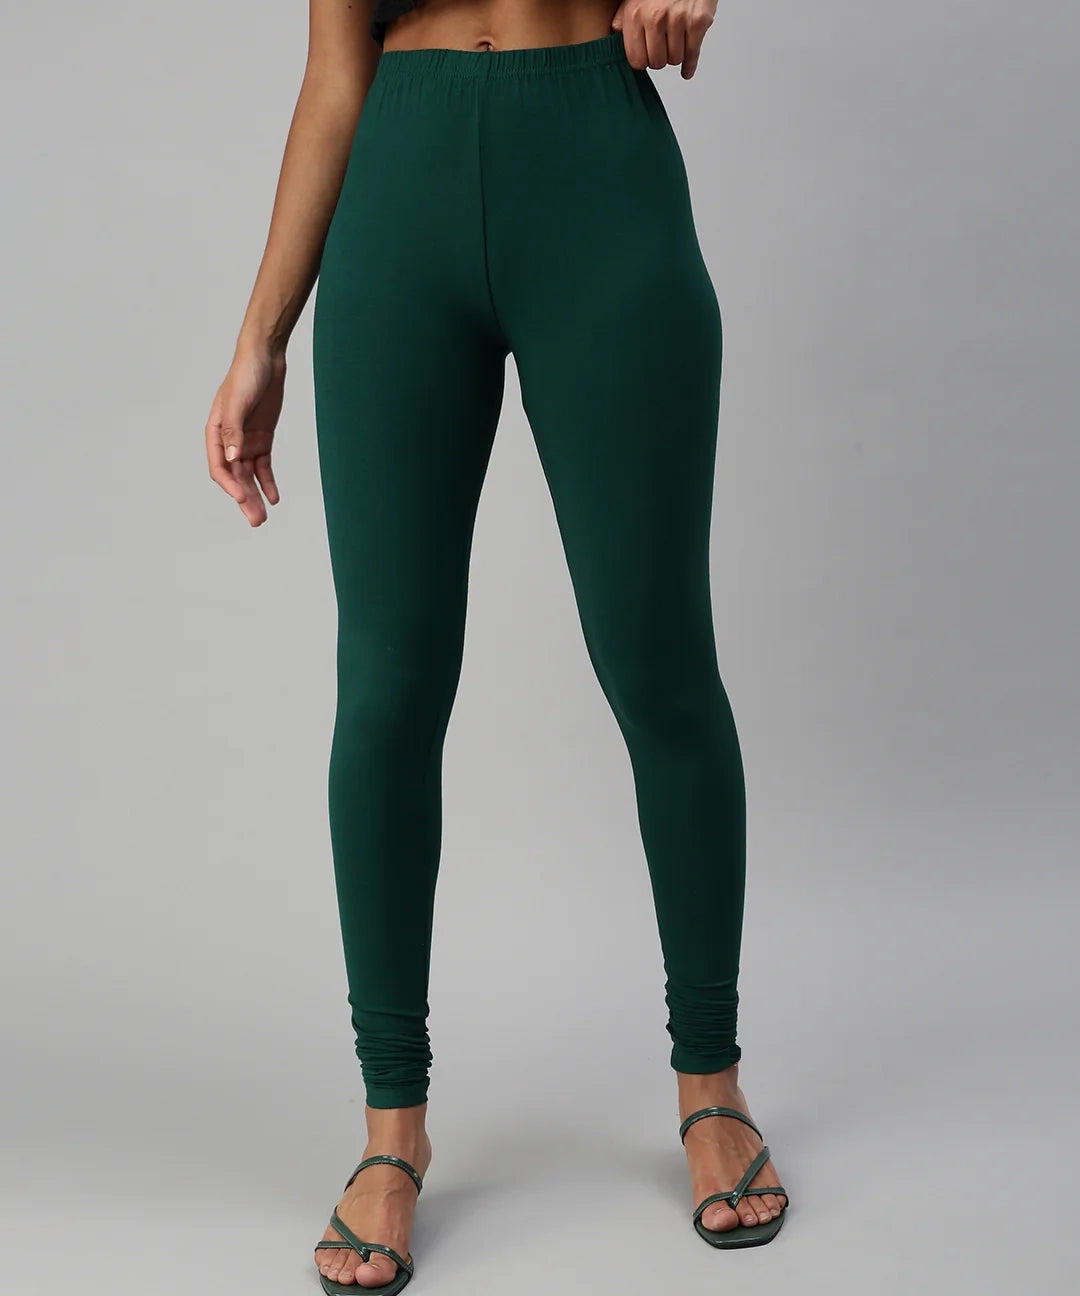 Green High Waist Cotton Lycra Leggings, Casual Wear, Slim Fit at Rs 280 in  Surat